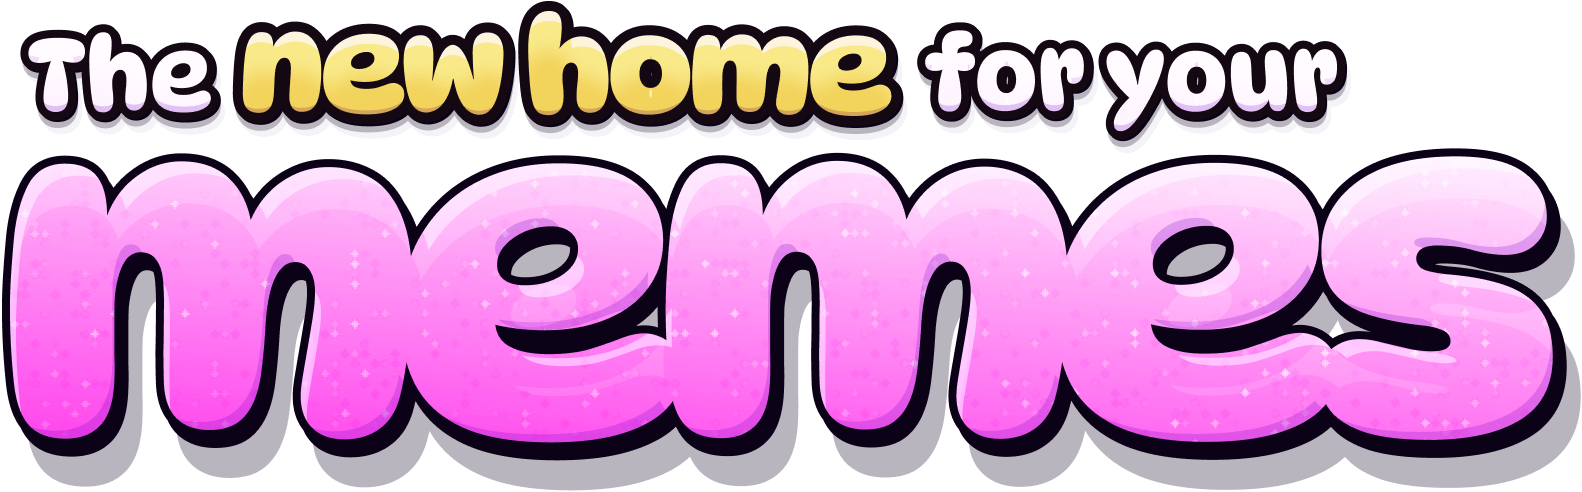 Text Logo: The new home for your memes